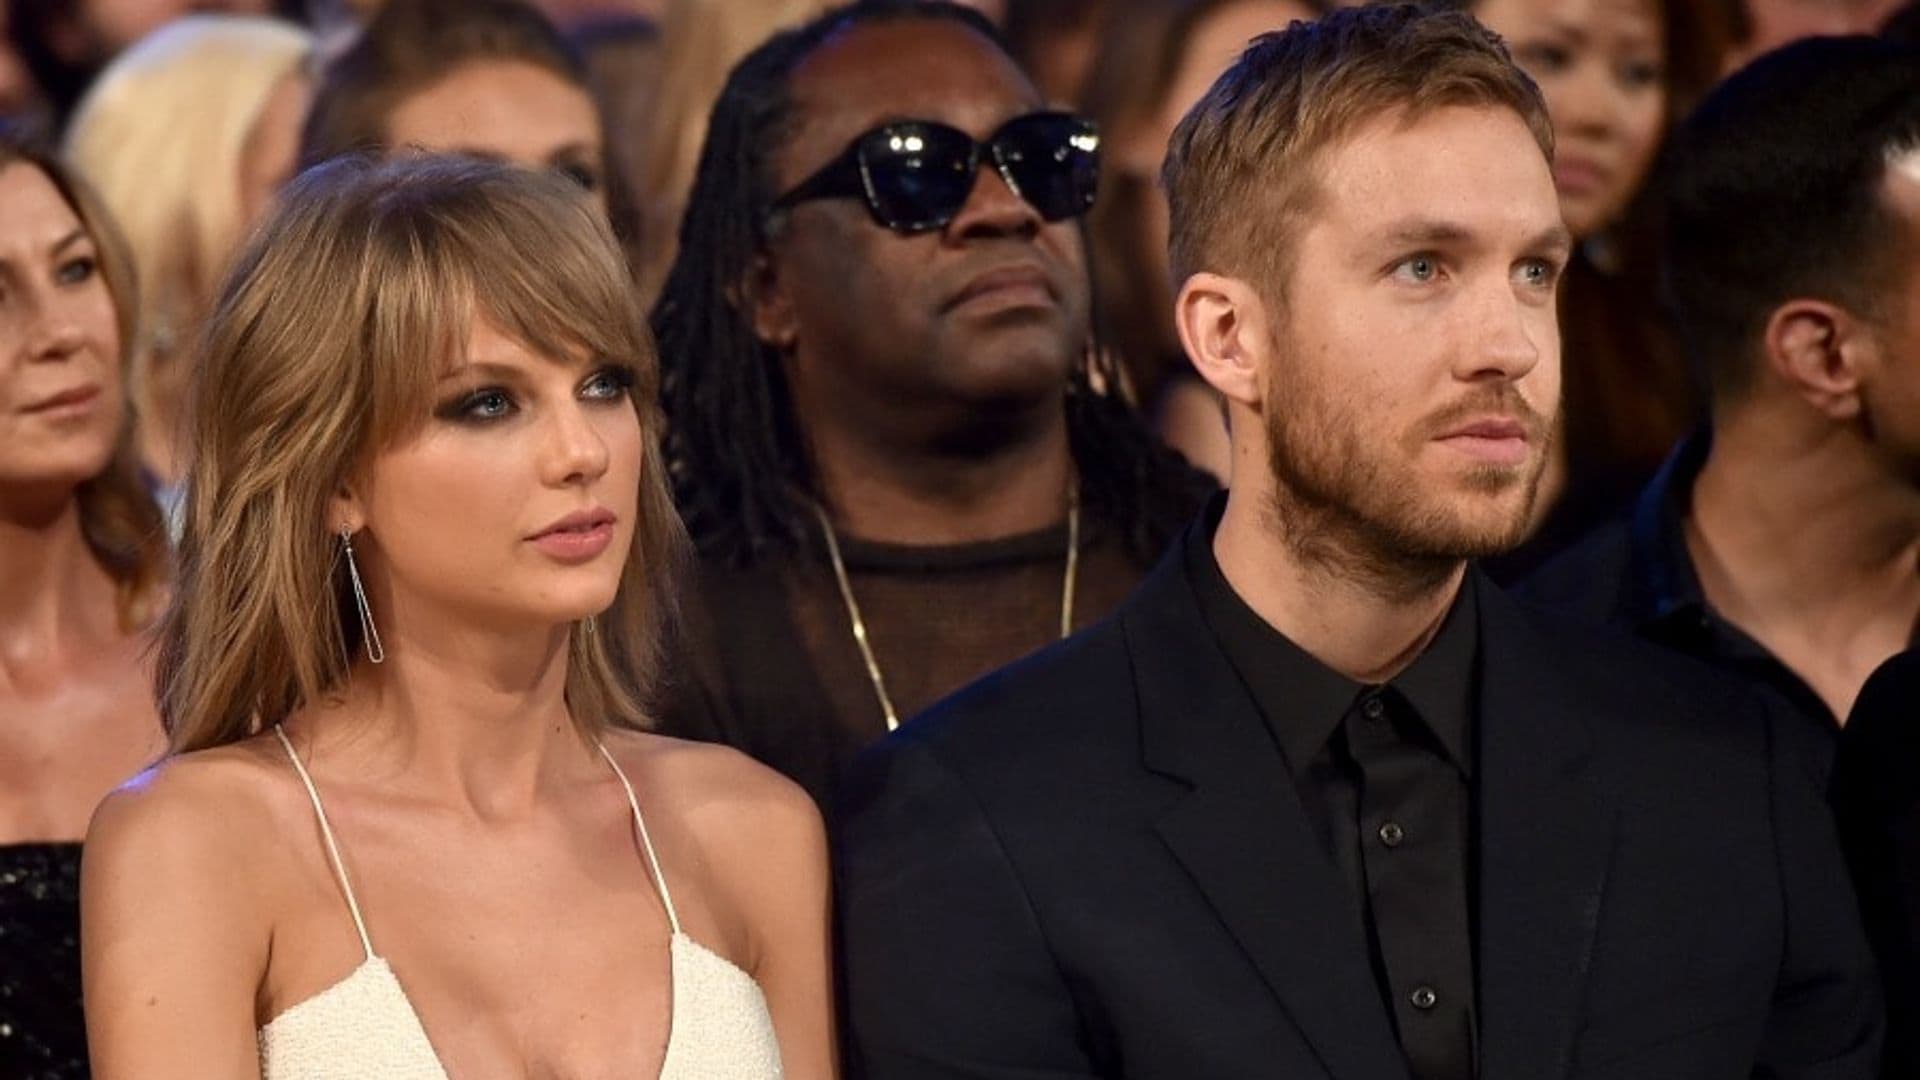 'Hurt' Calvin Harris tells Taylor Swift: 'Focus on your new relationship' after accusing her of 'trying to make me look bad'